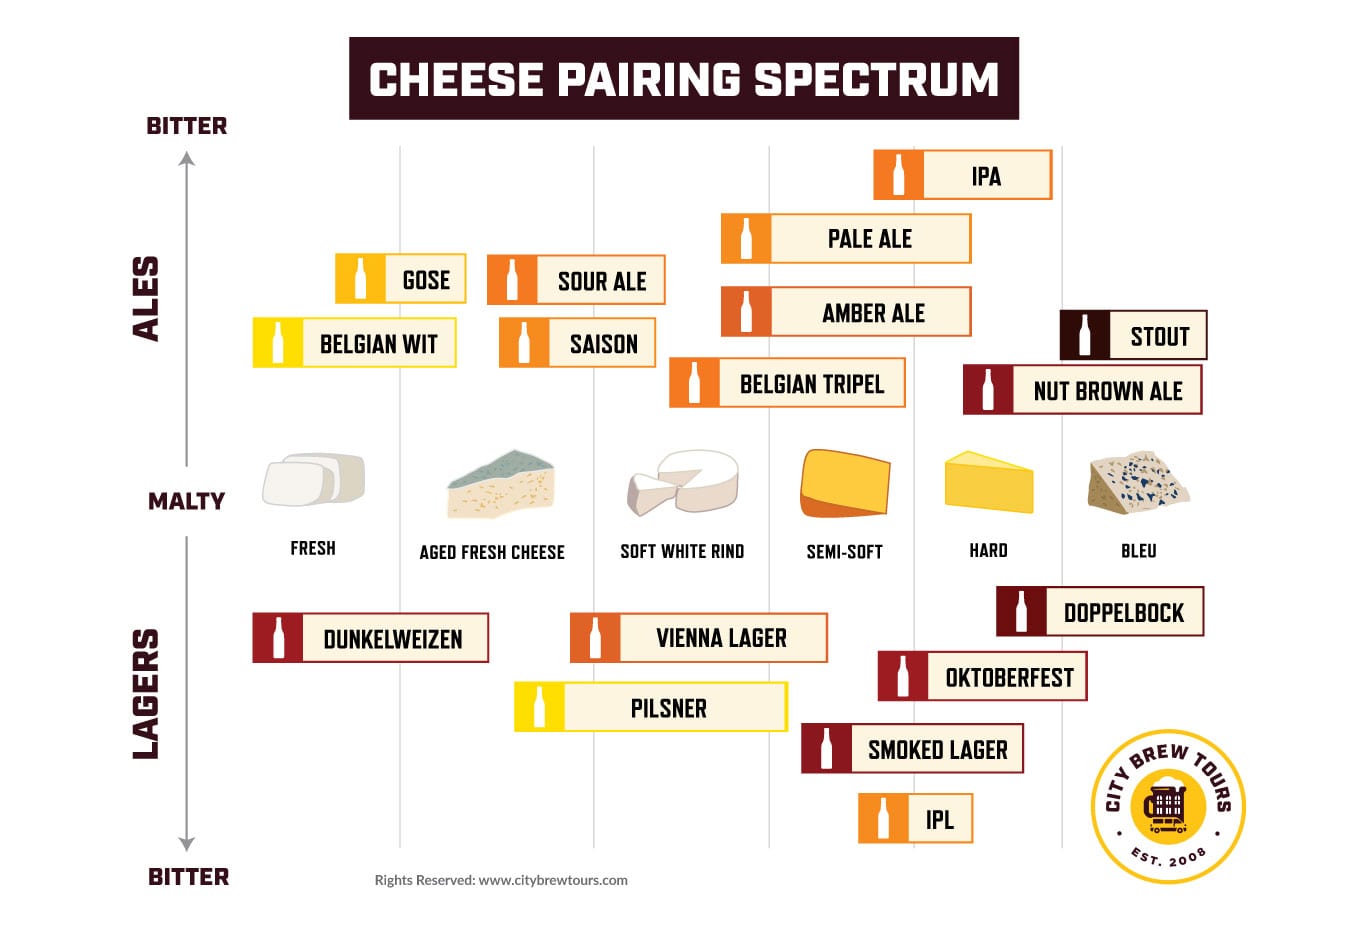 A chart showing types of cheeses that pair well with styles of beer